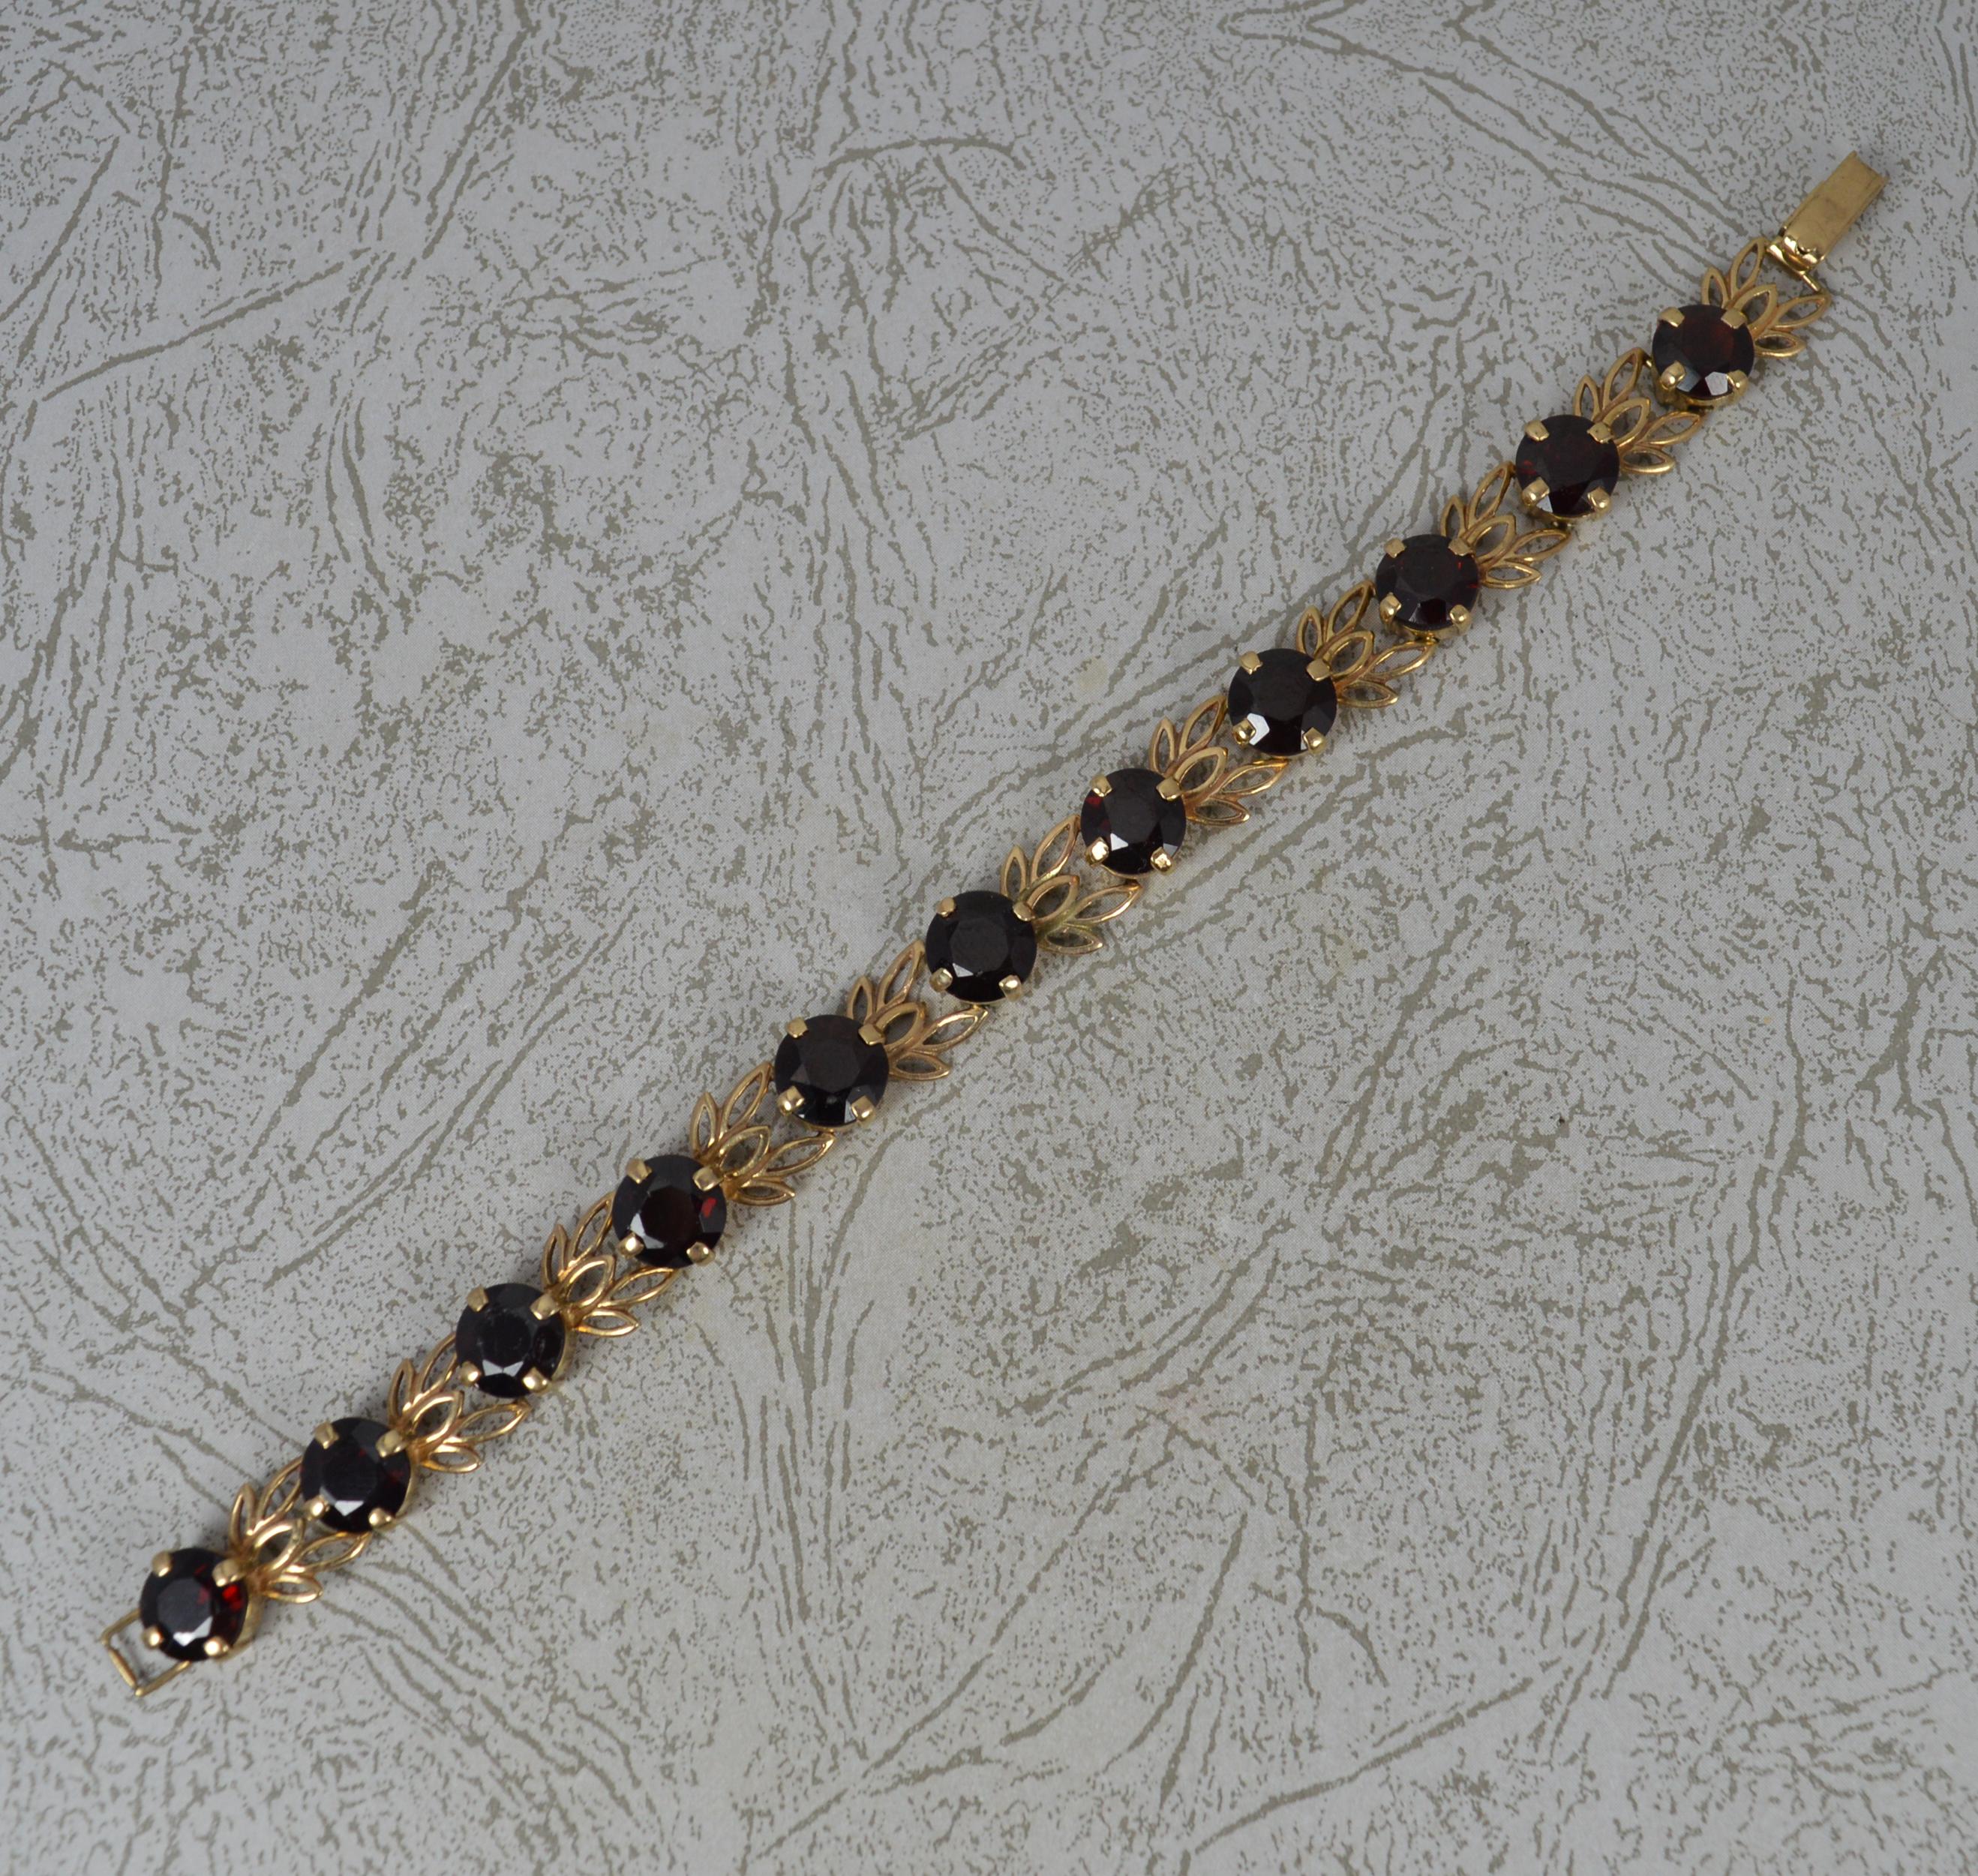 A superb vintage bracelet.
Solid 9 carat gold example.
Stylish links. Pierced leaf shaped links connecting many large round cut garnet stones.

CONDITION ; Very good for age. Working clasp. Crisp design. Issue free. Please view photographs.

WEIGHT